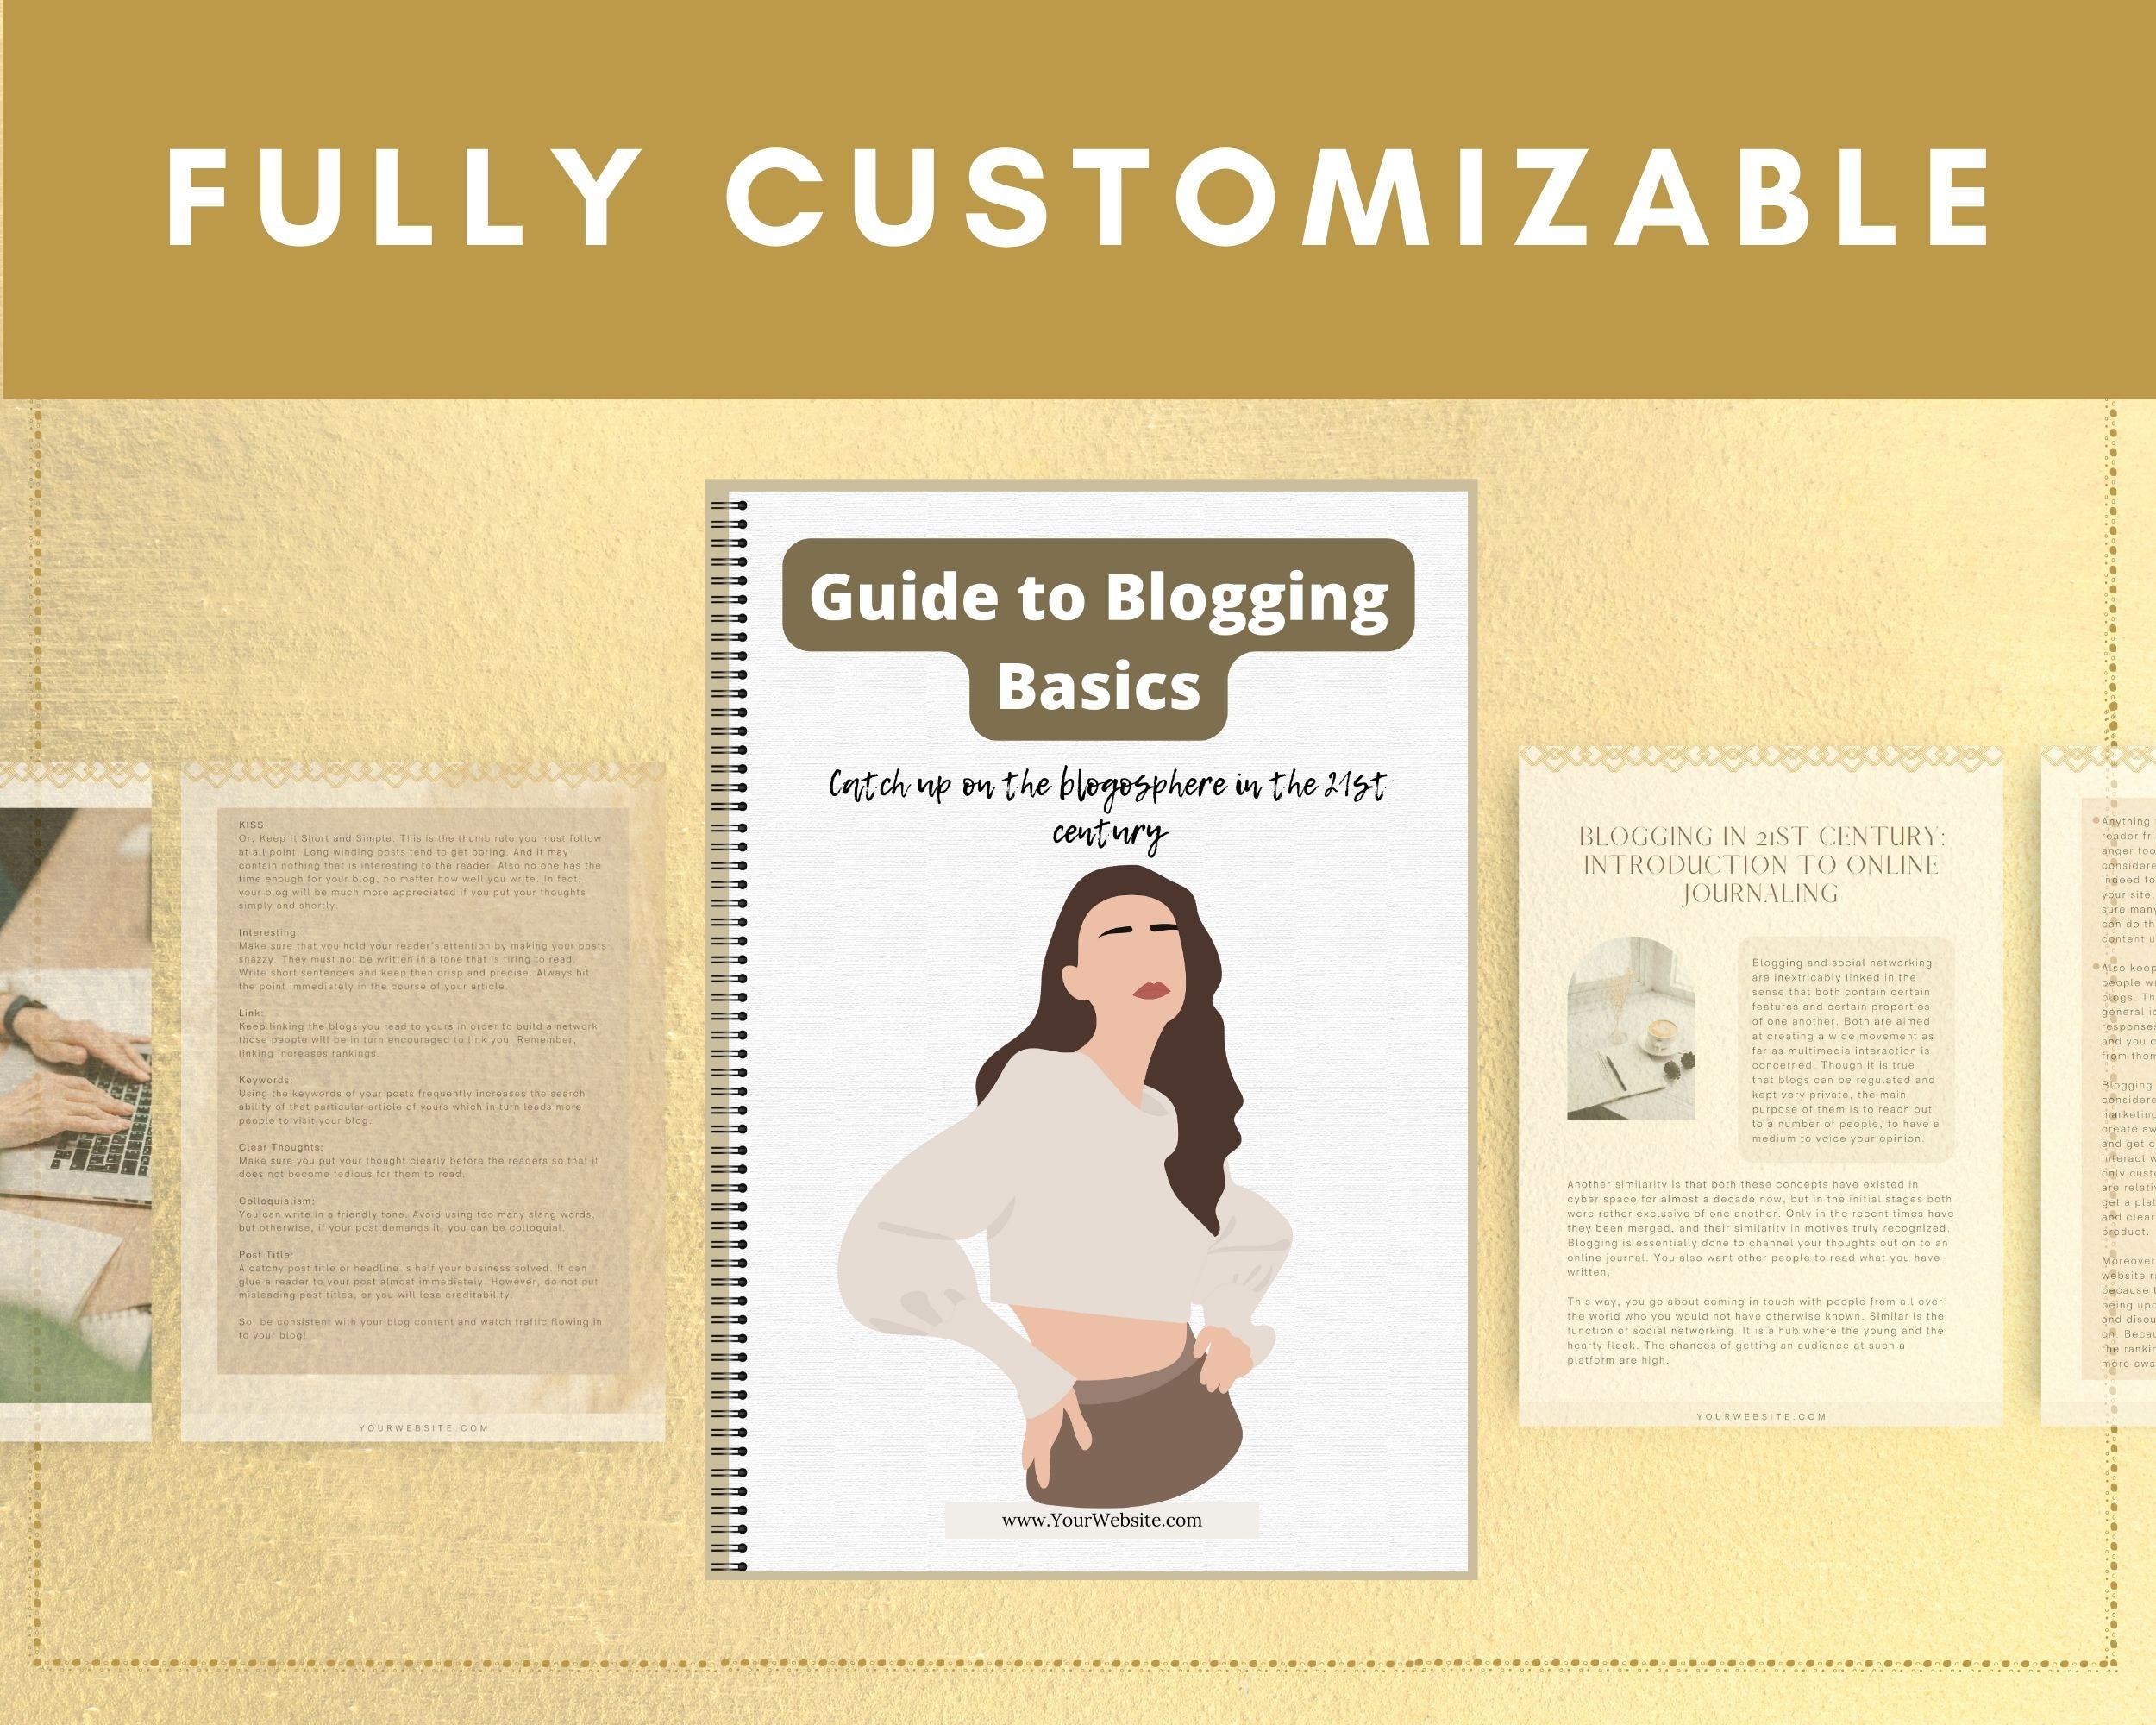 Editable Guide to Blogging Basics Ebook | Done-for-You Ebook in Canva | Rebrandable and Resizable Canva Template